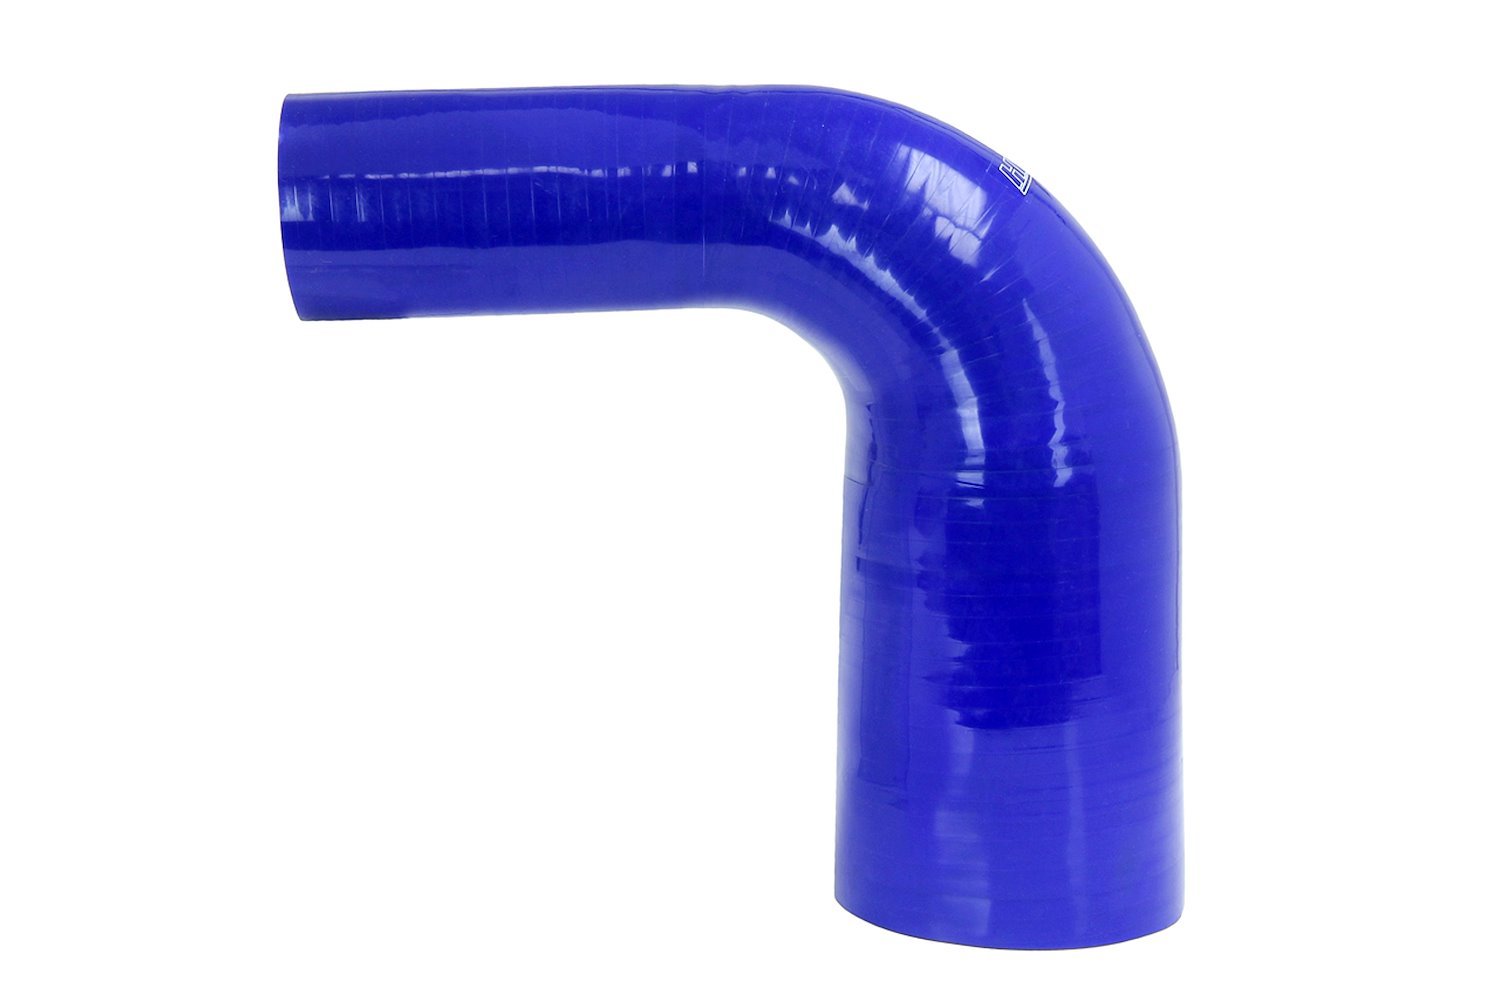 HTSER90-200-225-BLUE Silicone 90-Degree Elbow Hose, High-Temp 4-Ply Reinforced, 2 in. - 2-1/4 in. ID, Blue